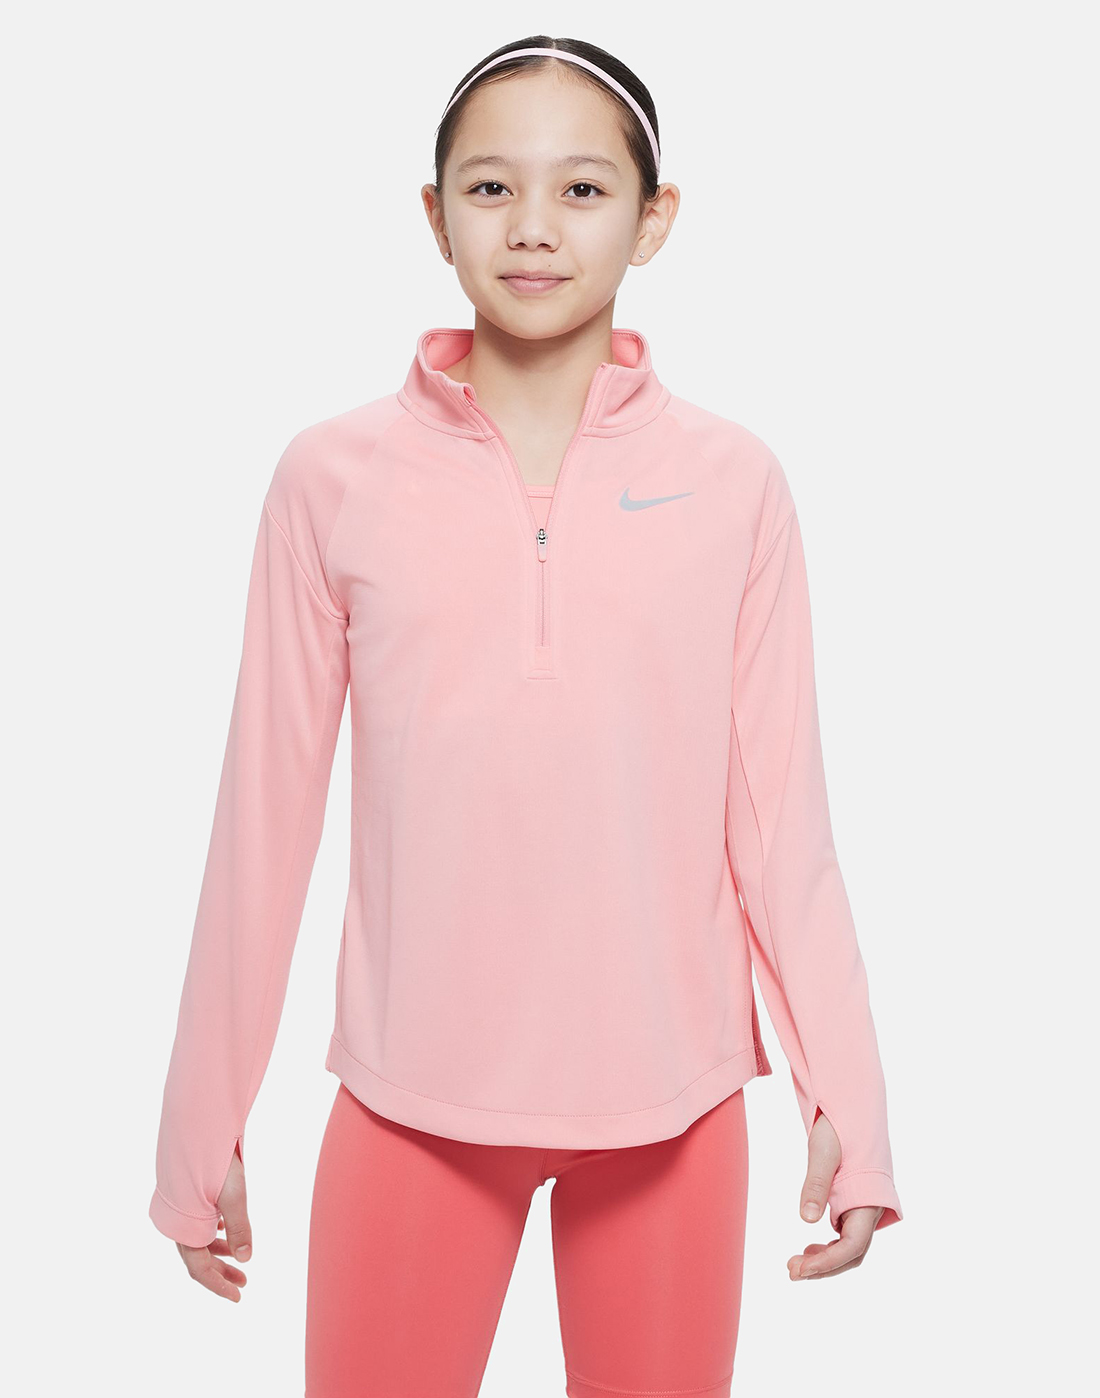 Nike Older Girls Dry-Fit Half Zip Top - Pink | Life Style Sports IE